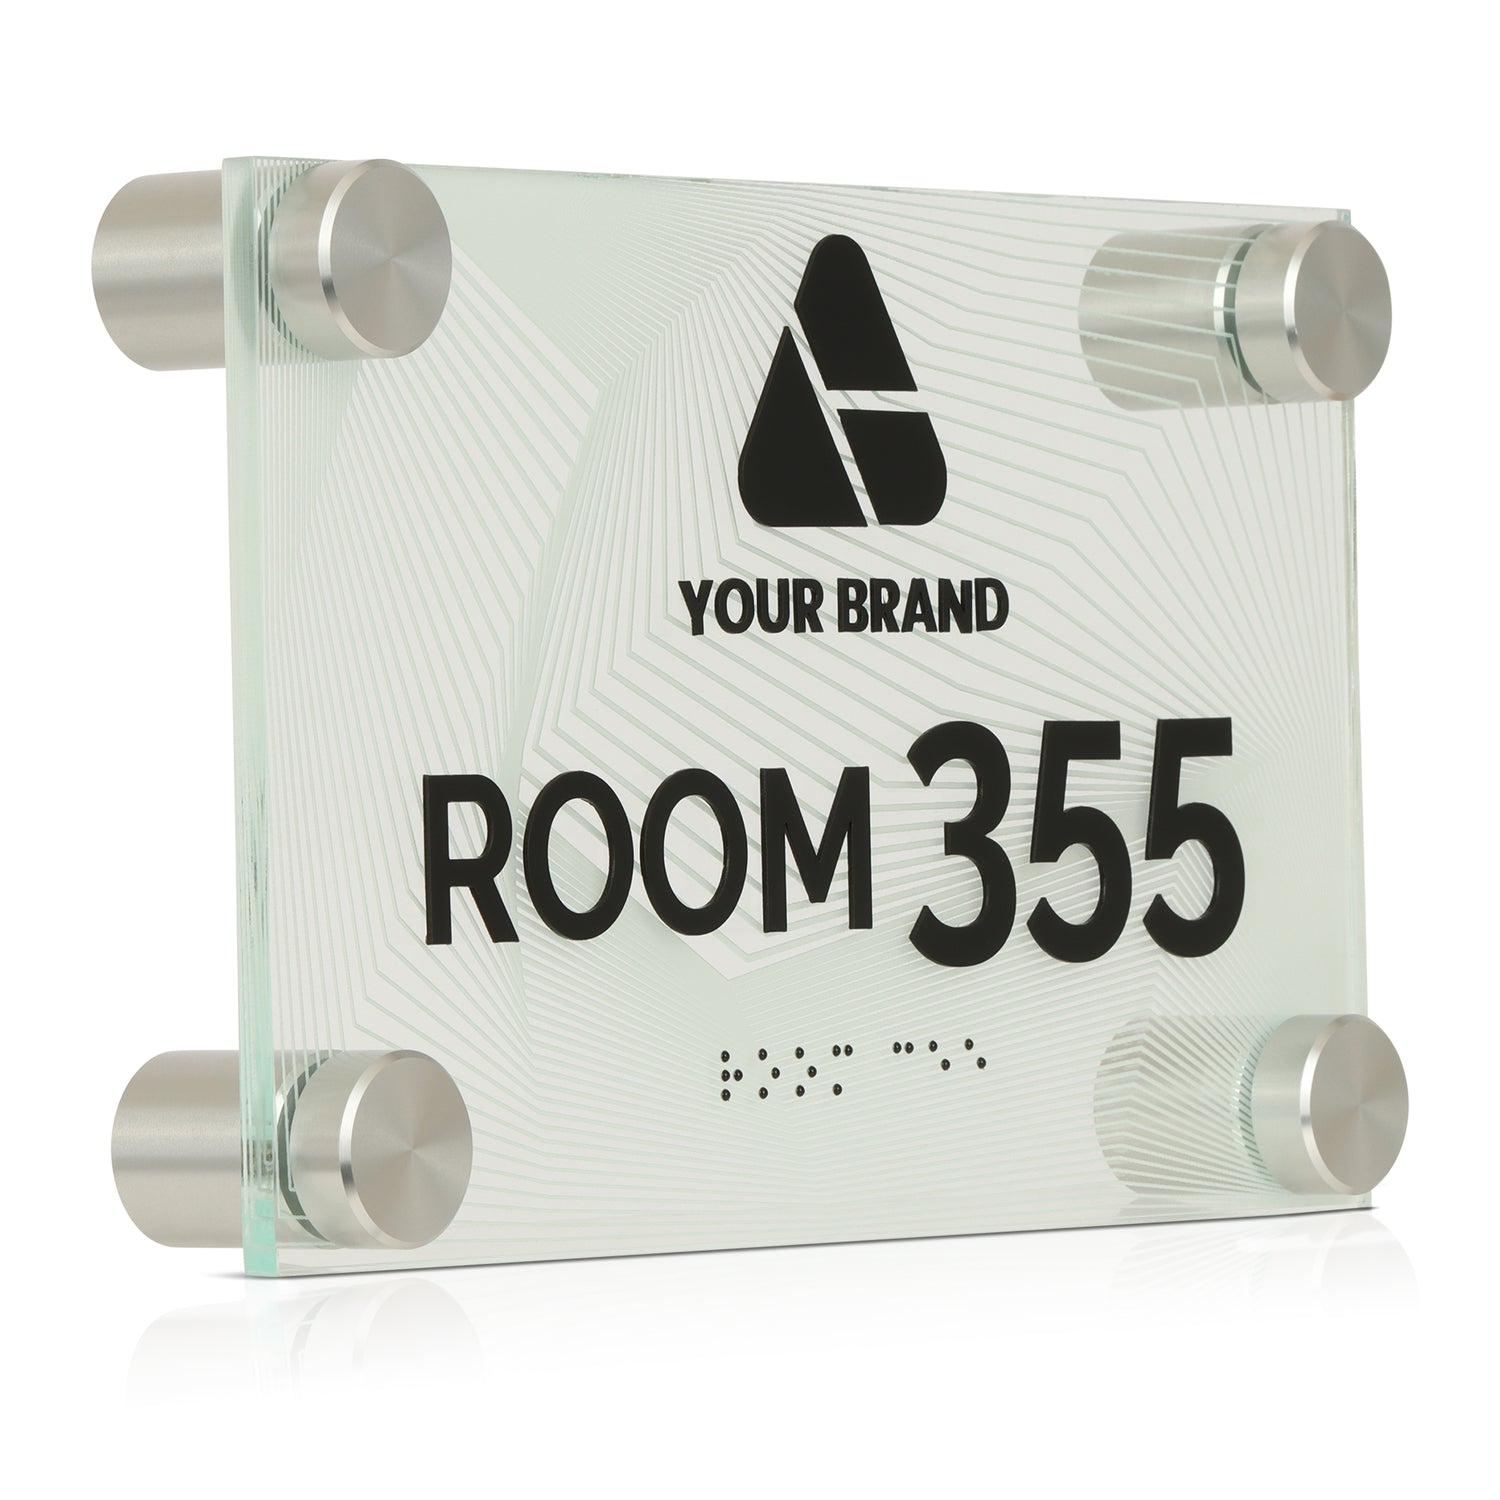 Room 355 Acrylic Signage with Standoffs